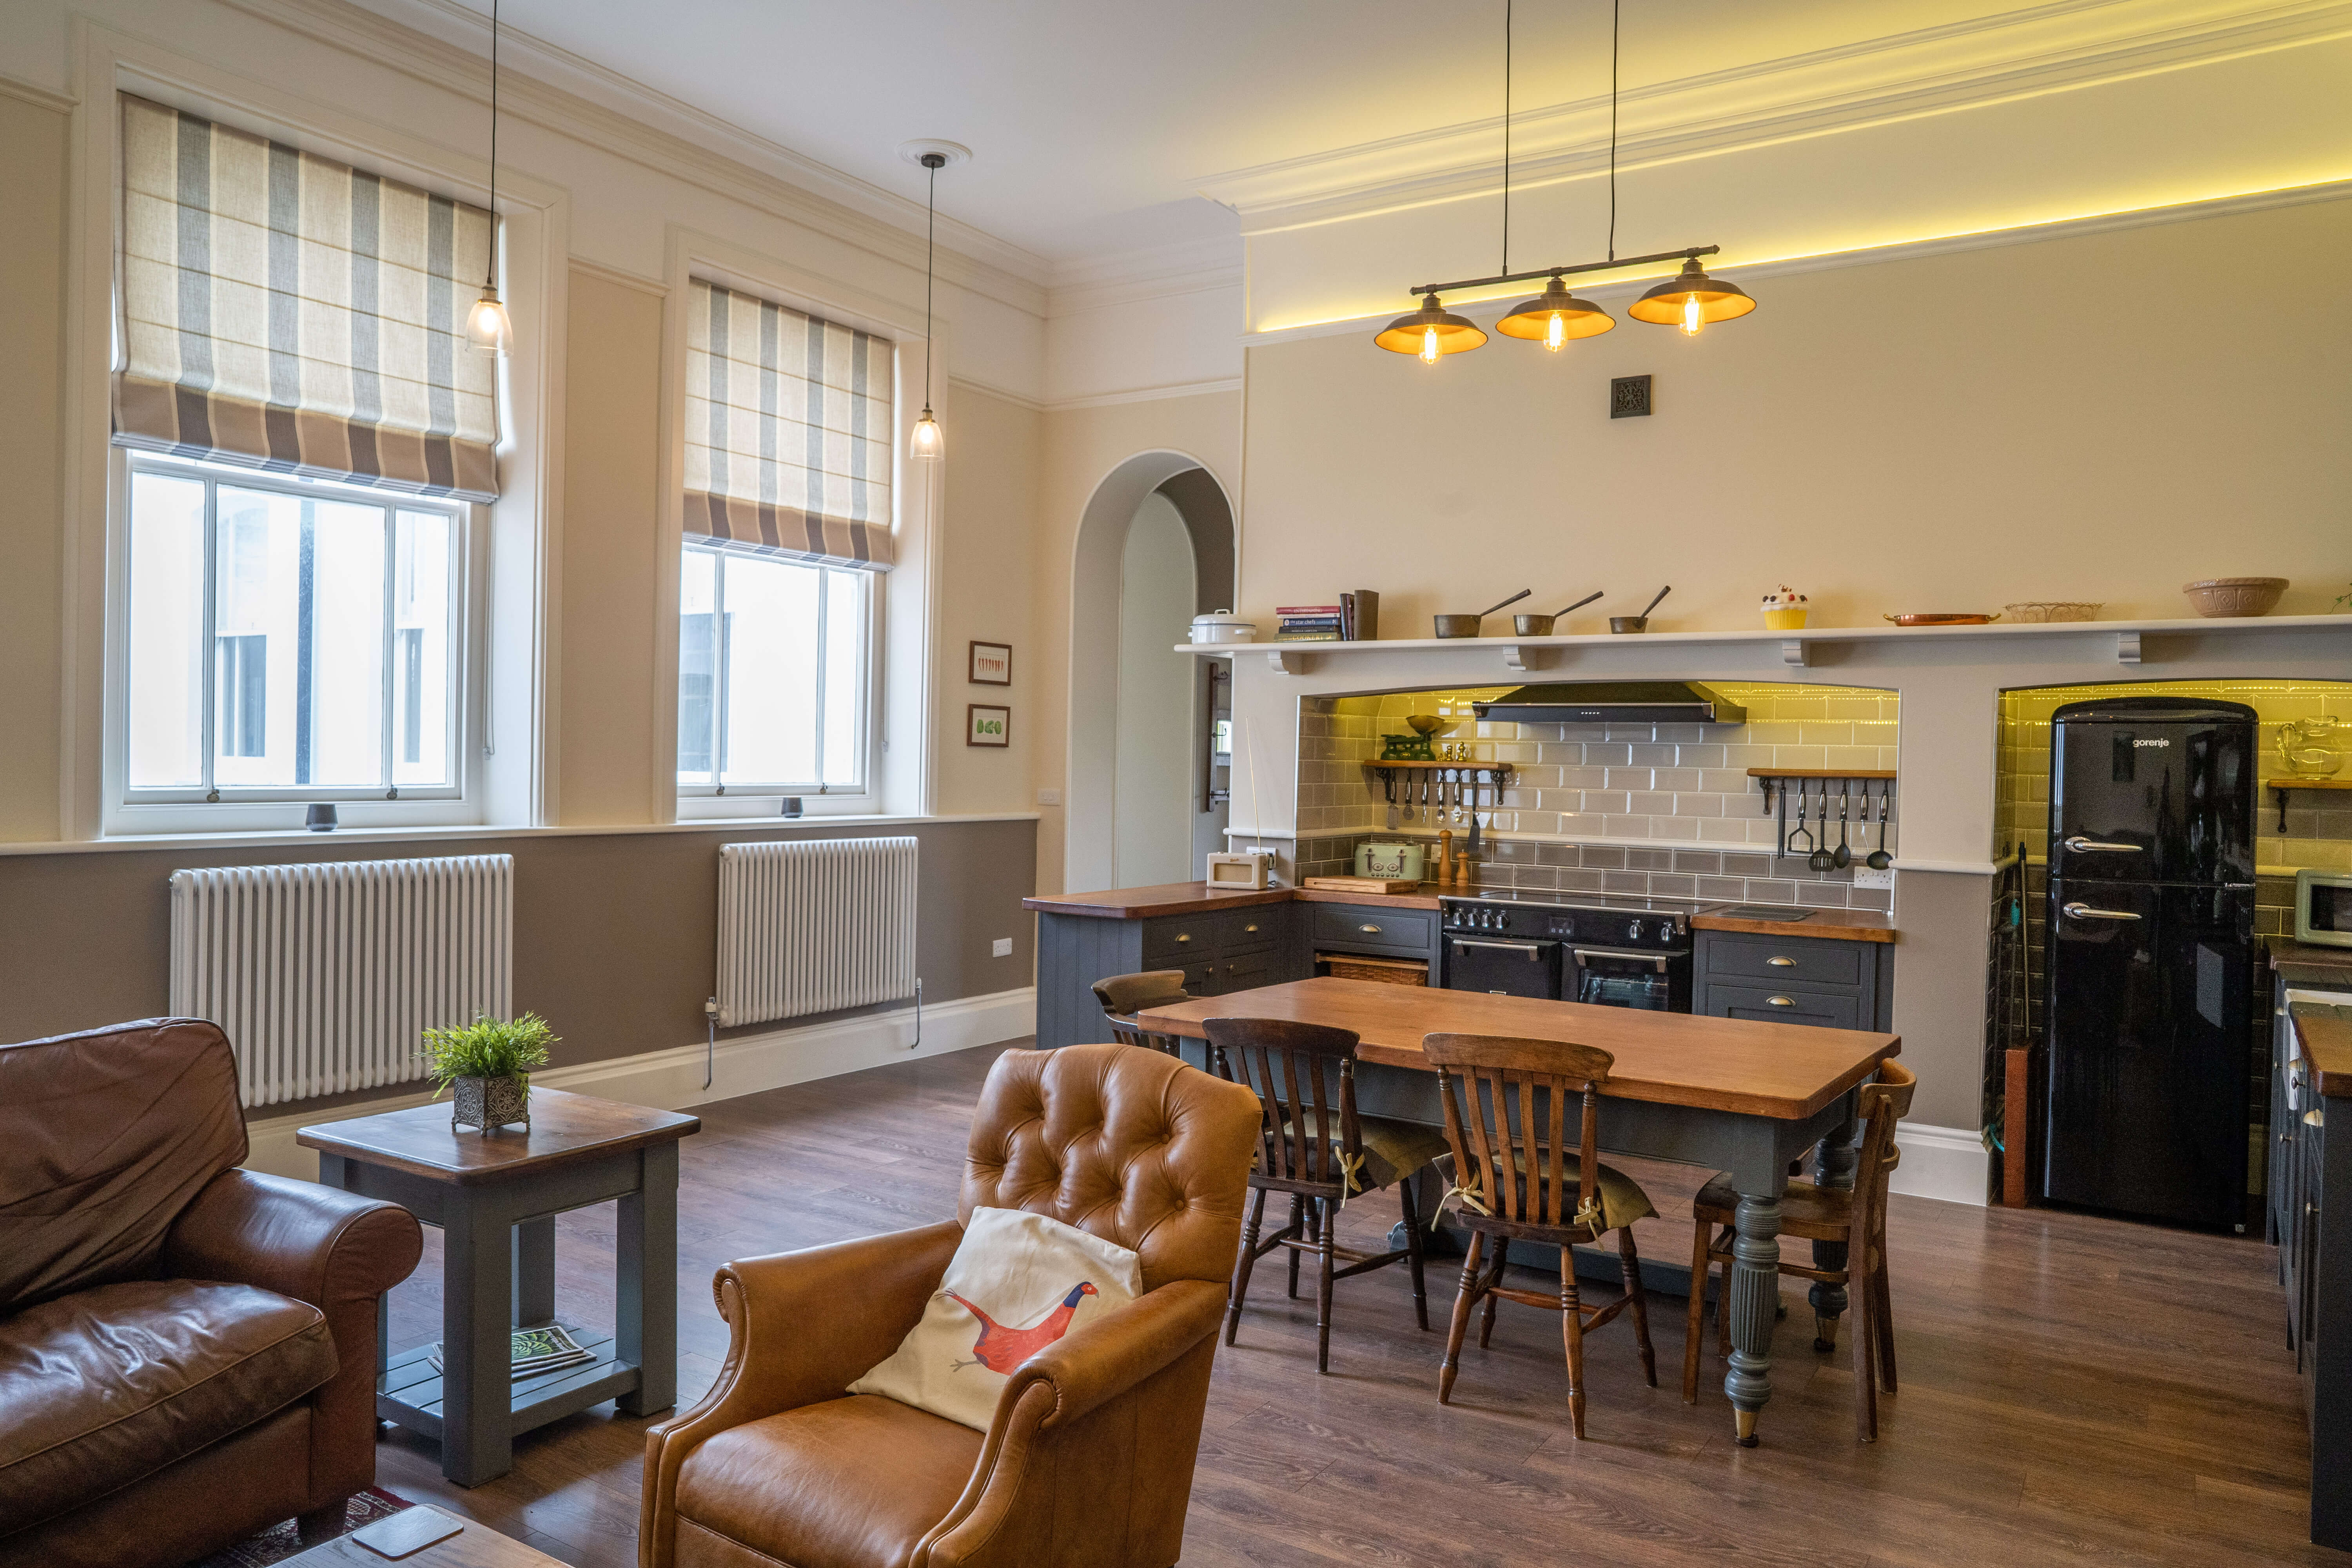 Moreton House - Cook's lounge and open plan kitchen diner